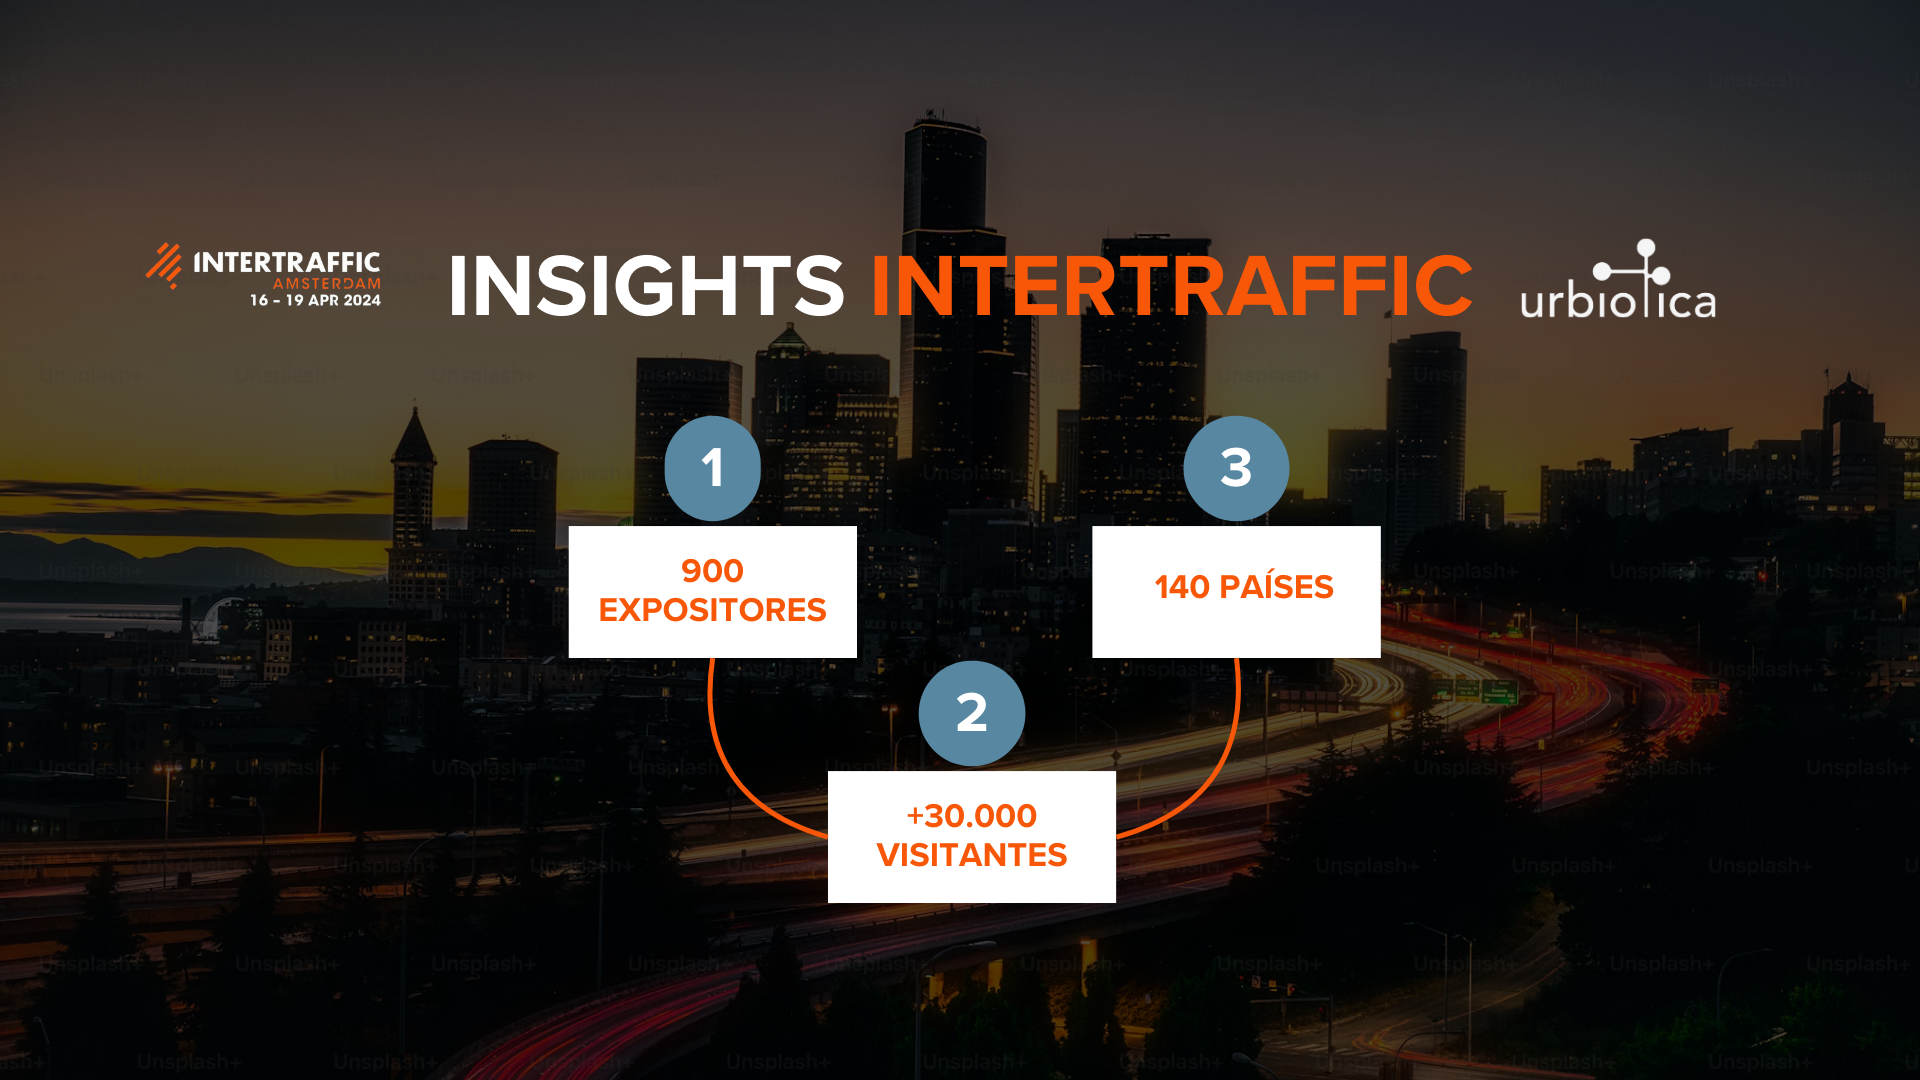 Summary of our experience at Intertraffic 